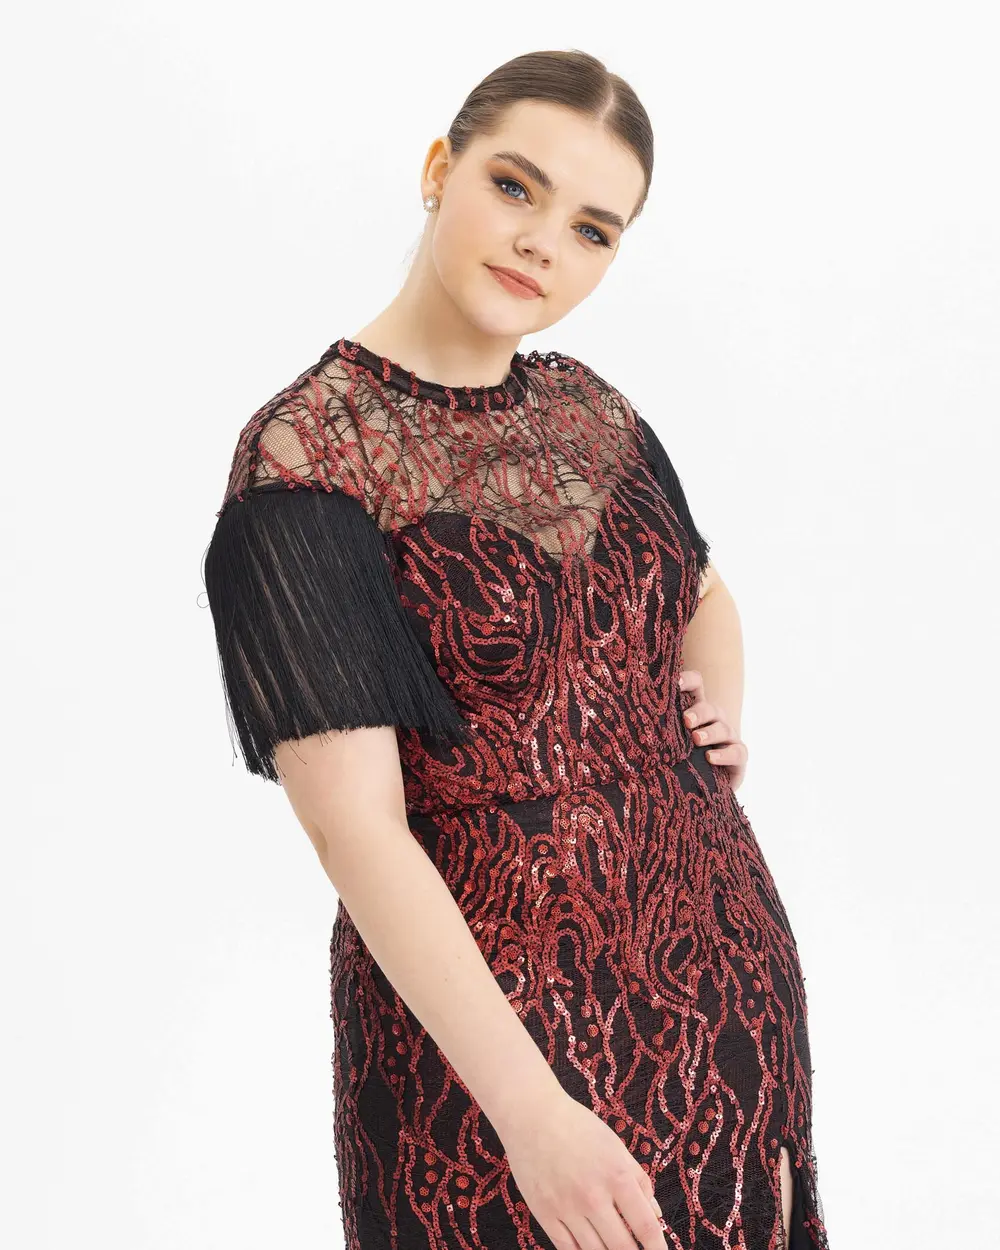 PLUS SIZE FISH FORM SEQUINED EVENING DRESS